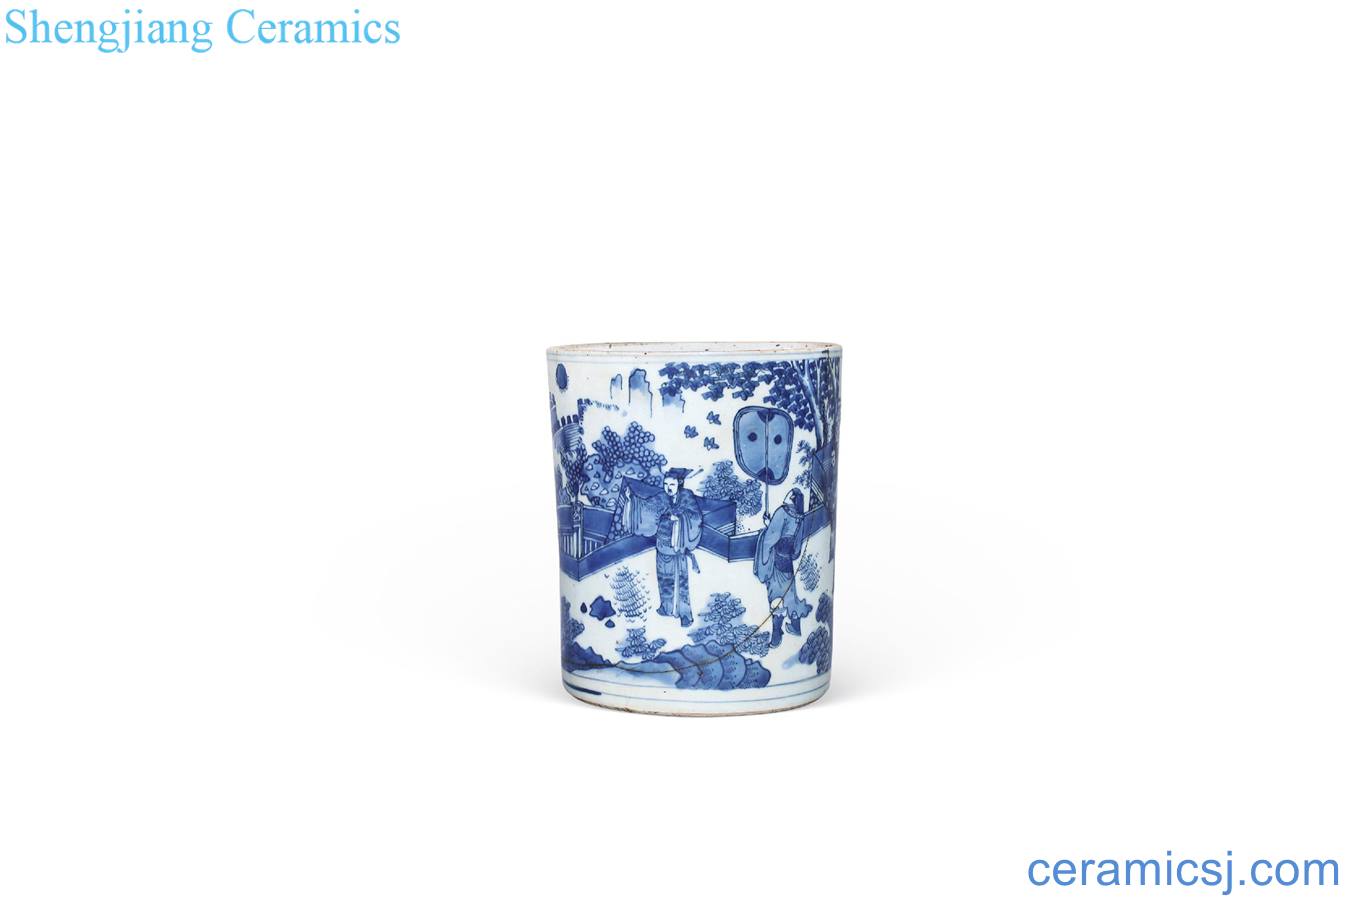 The late Ming dynasty Blue and white landscape character brush pot